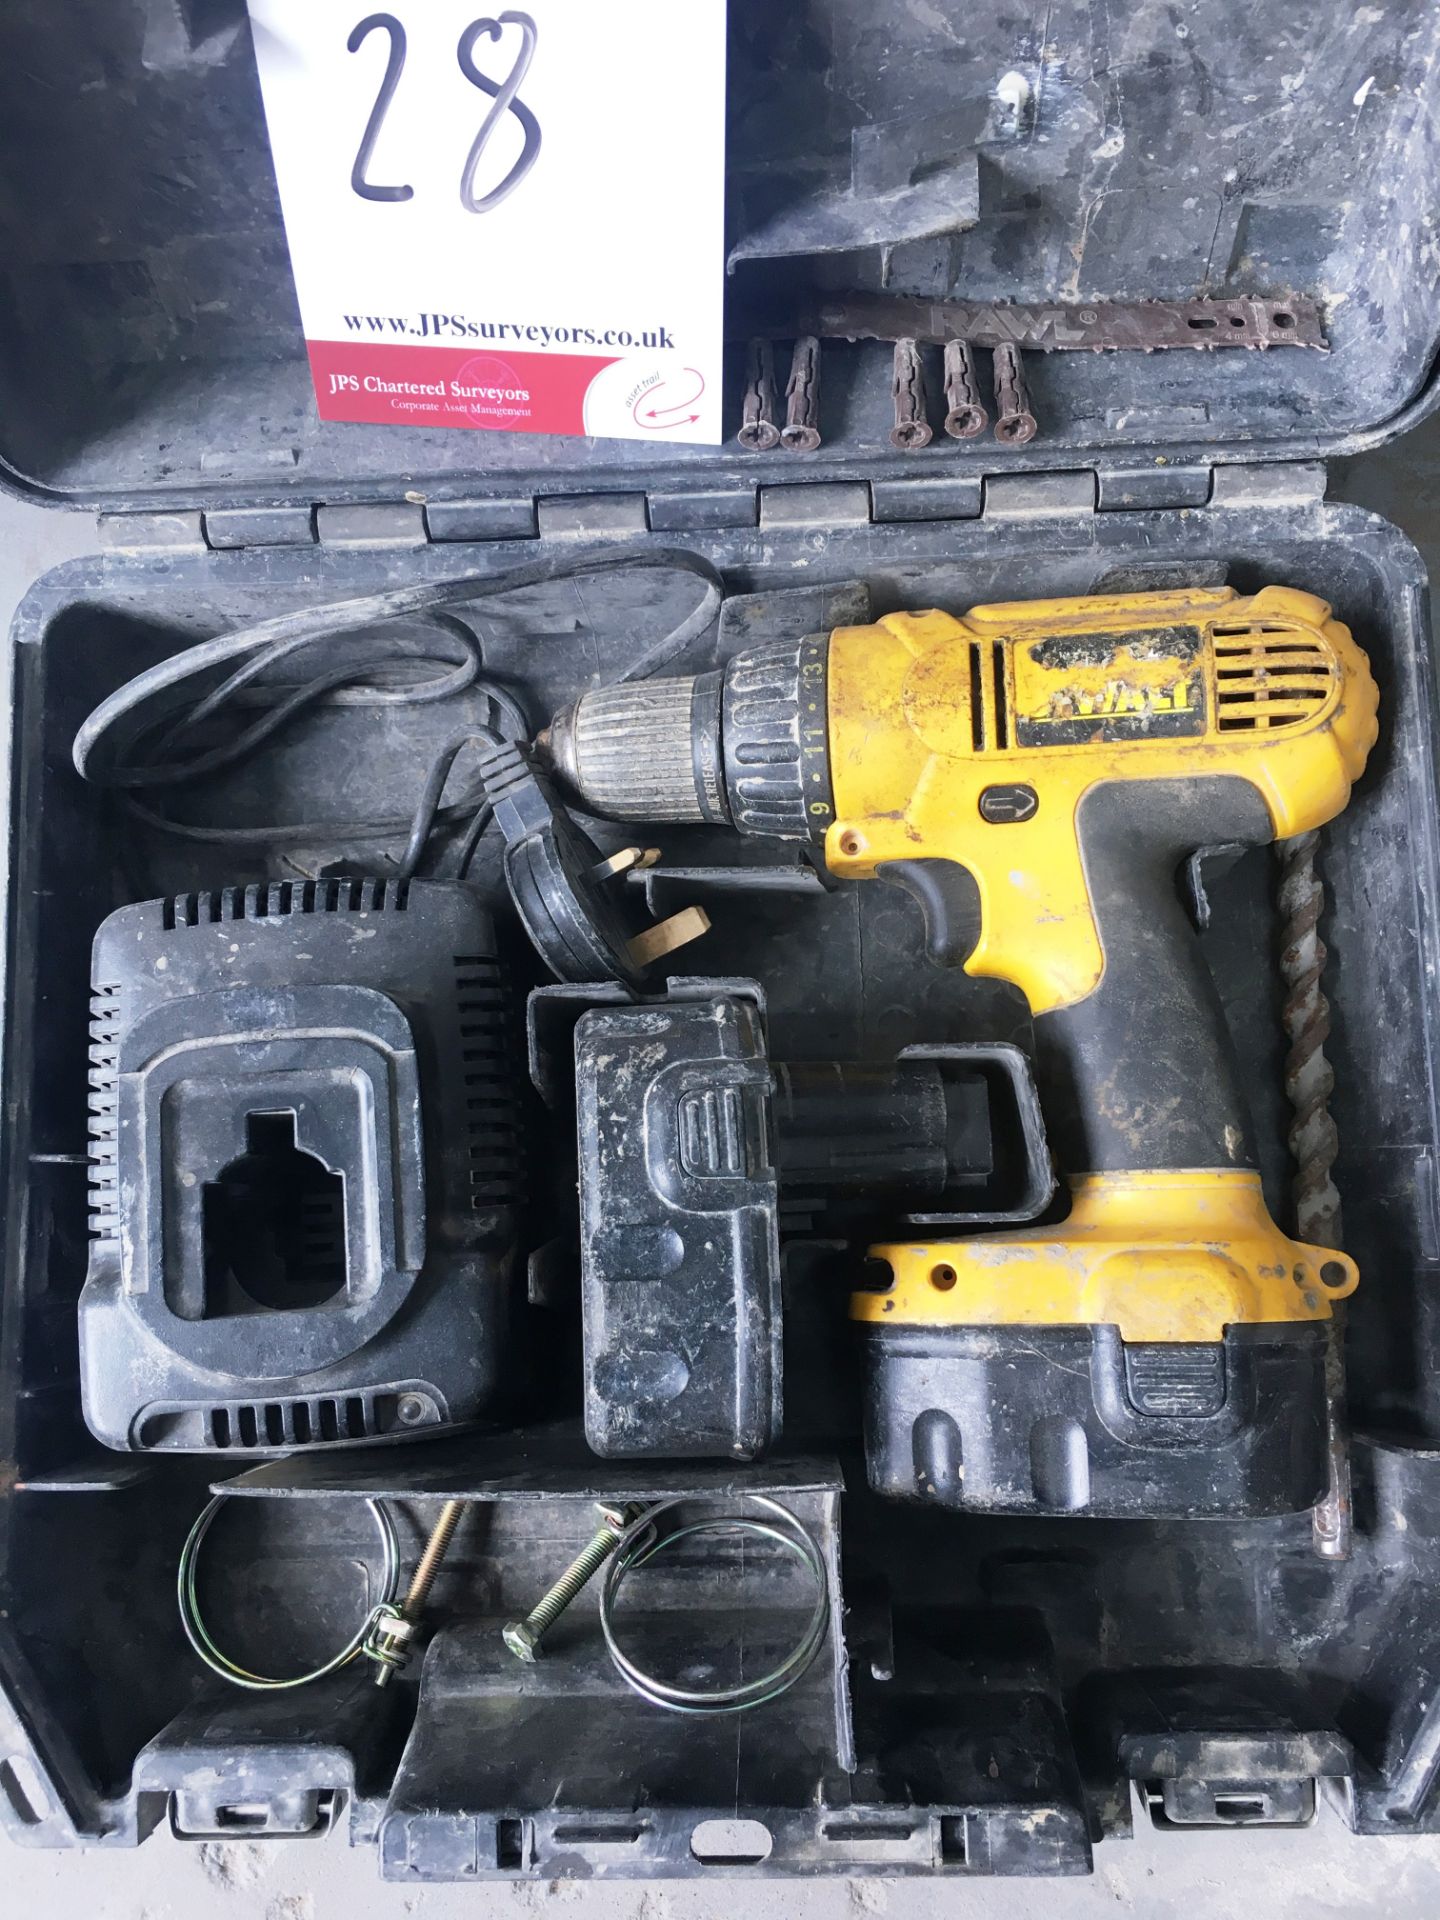 Dewalt DC728 Cordless Drill w/ Case & 2 x Battery Chargers - Image 2 of 2